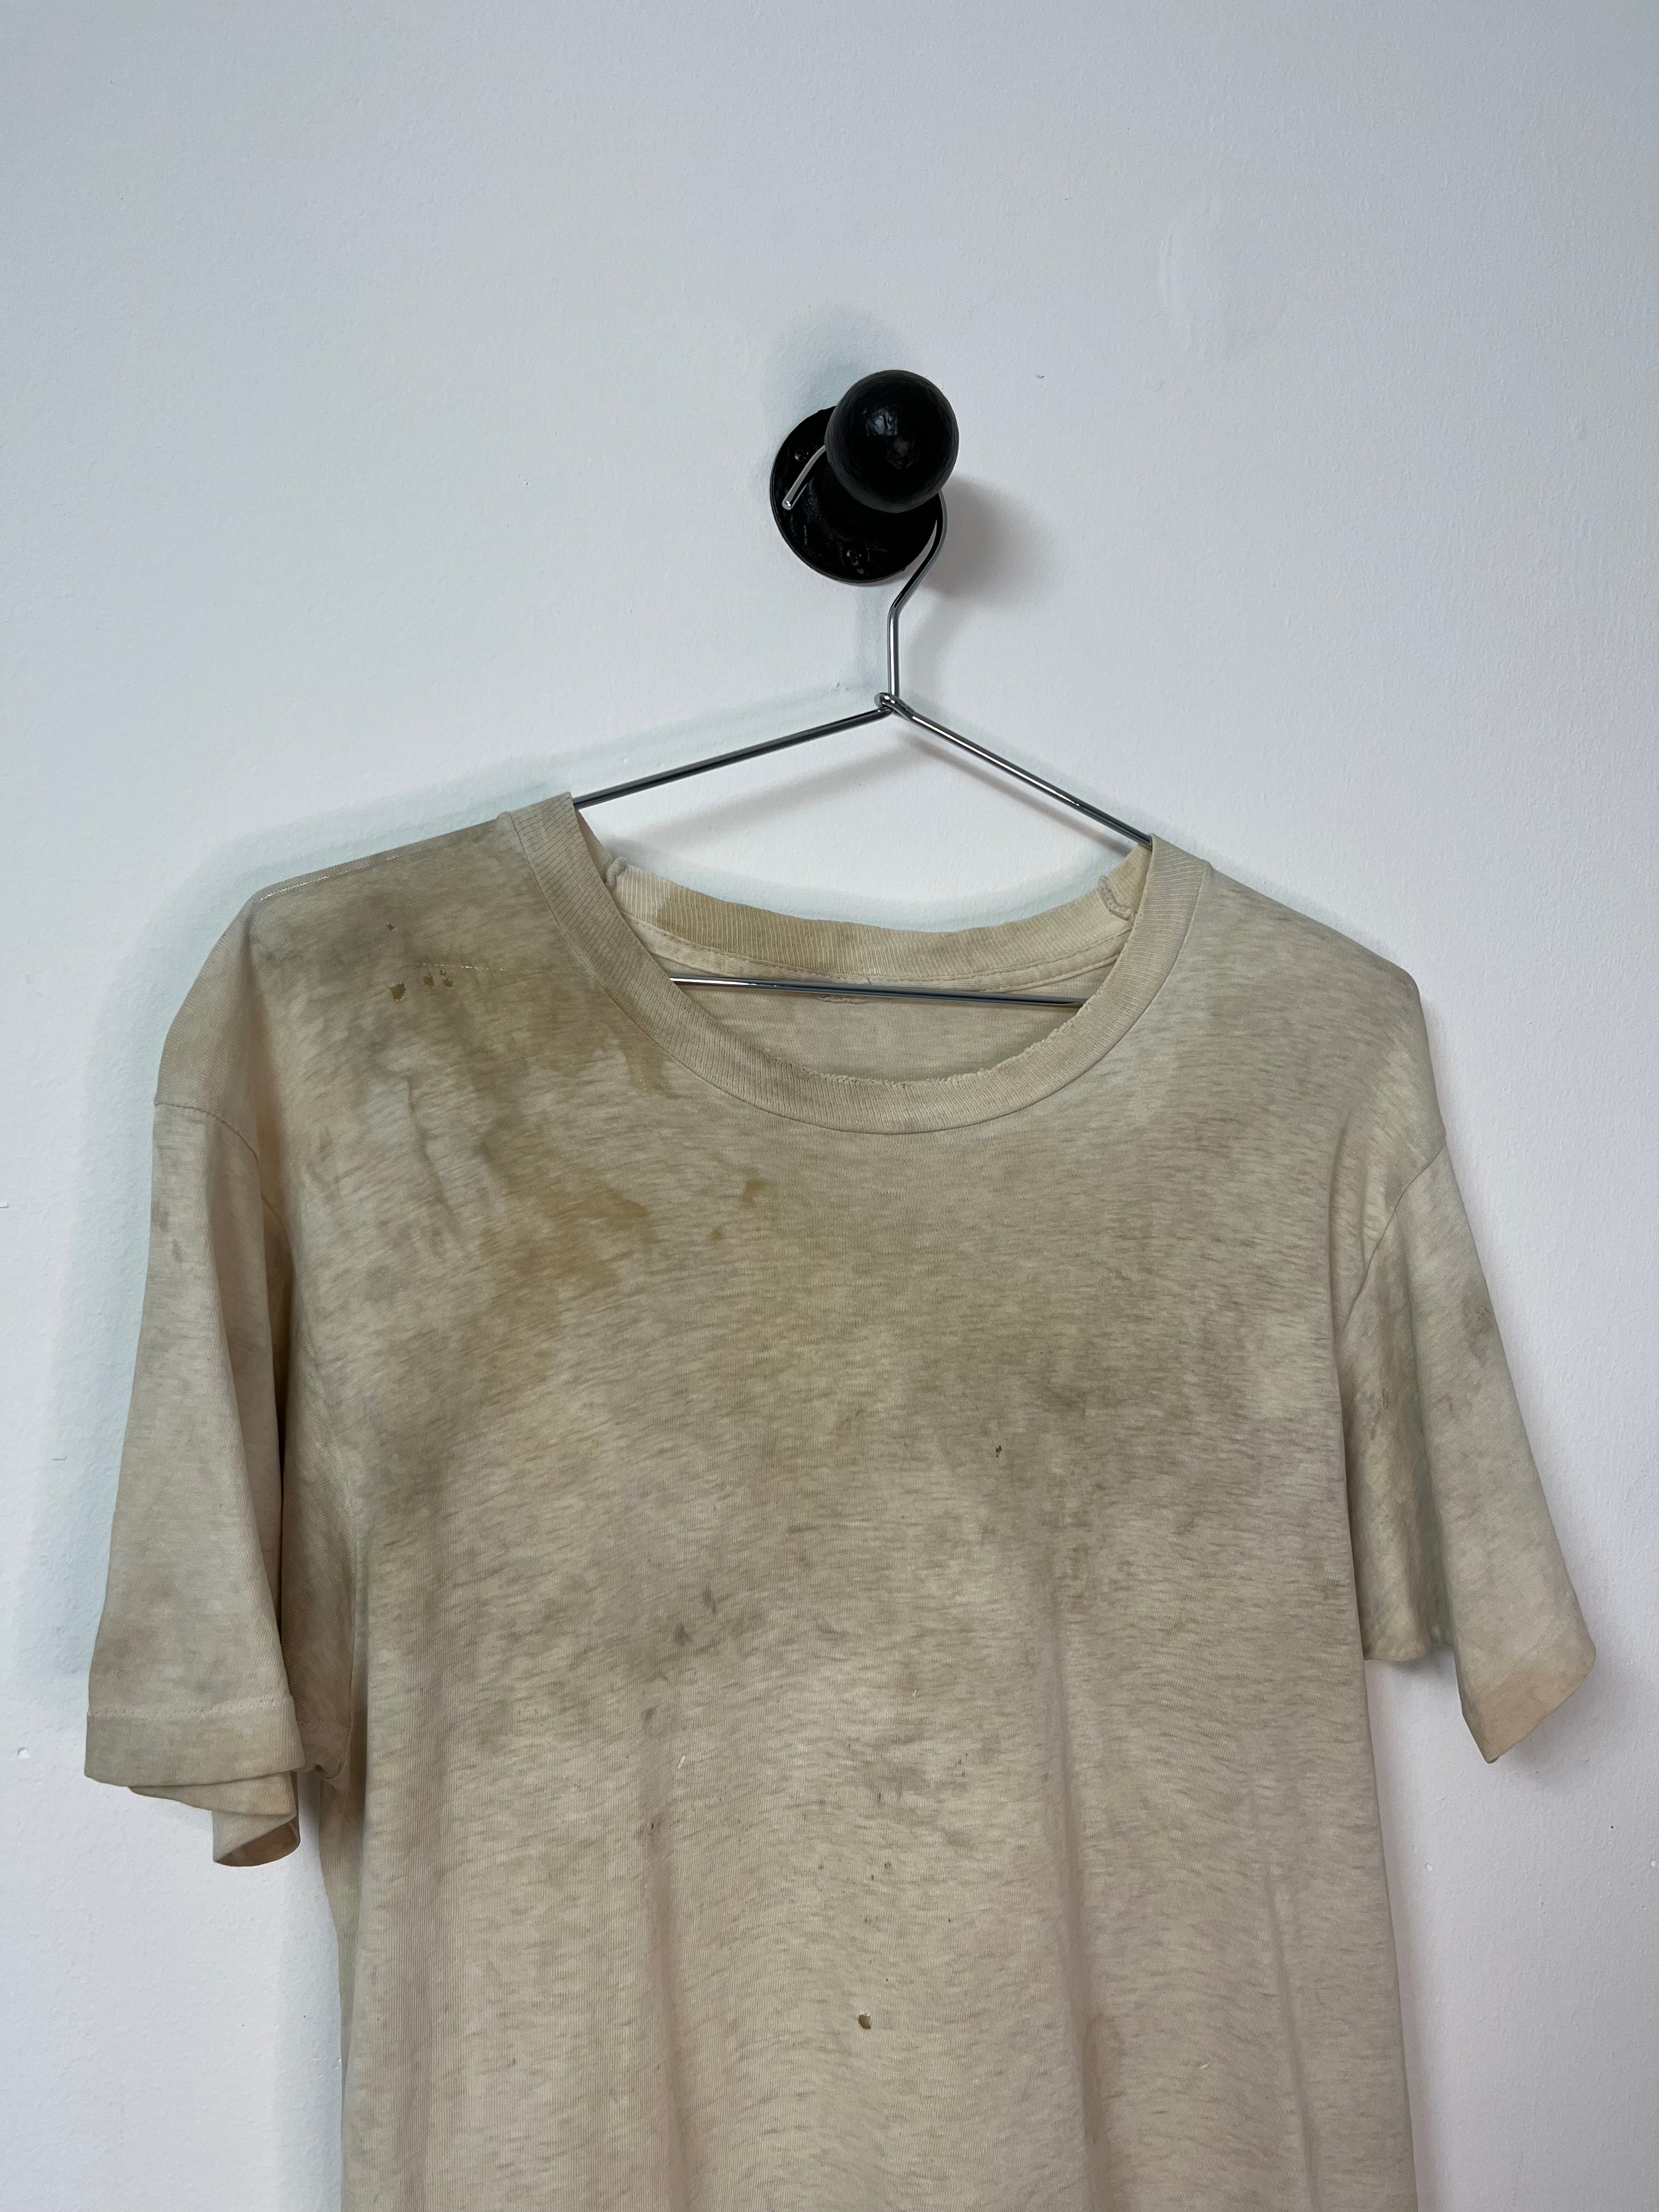 1970s Distressed T-Shirt with Discoloration- Dirty/Aged White - L/XL